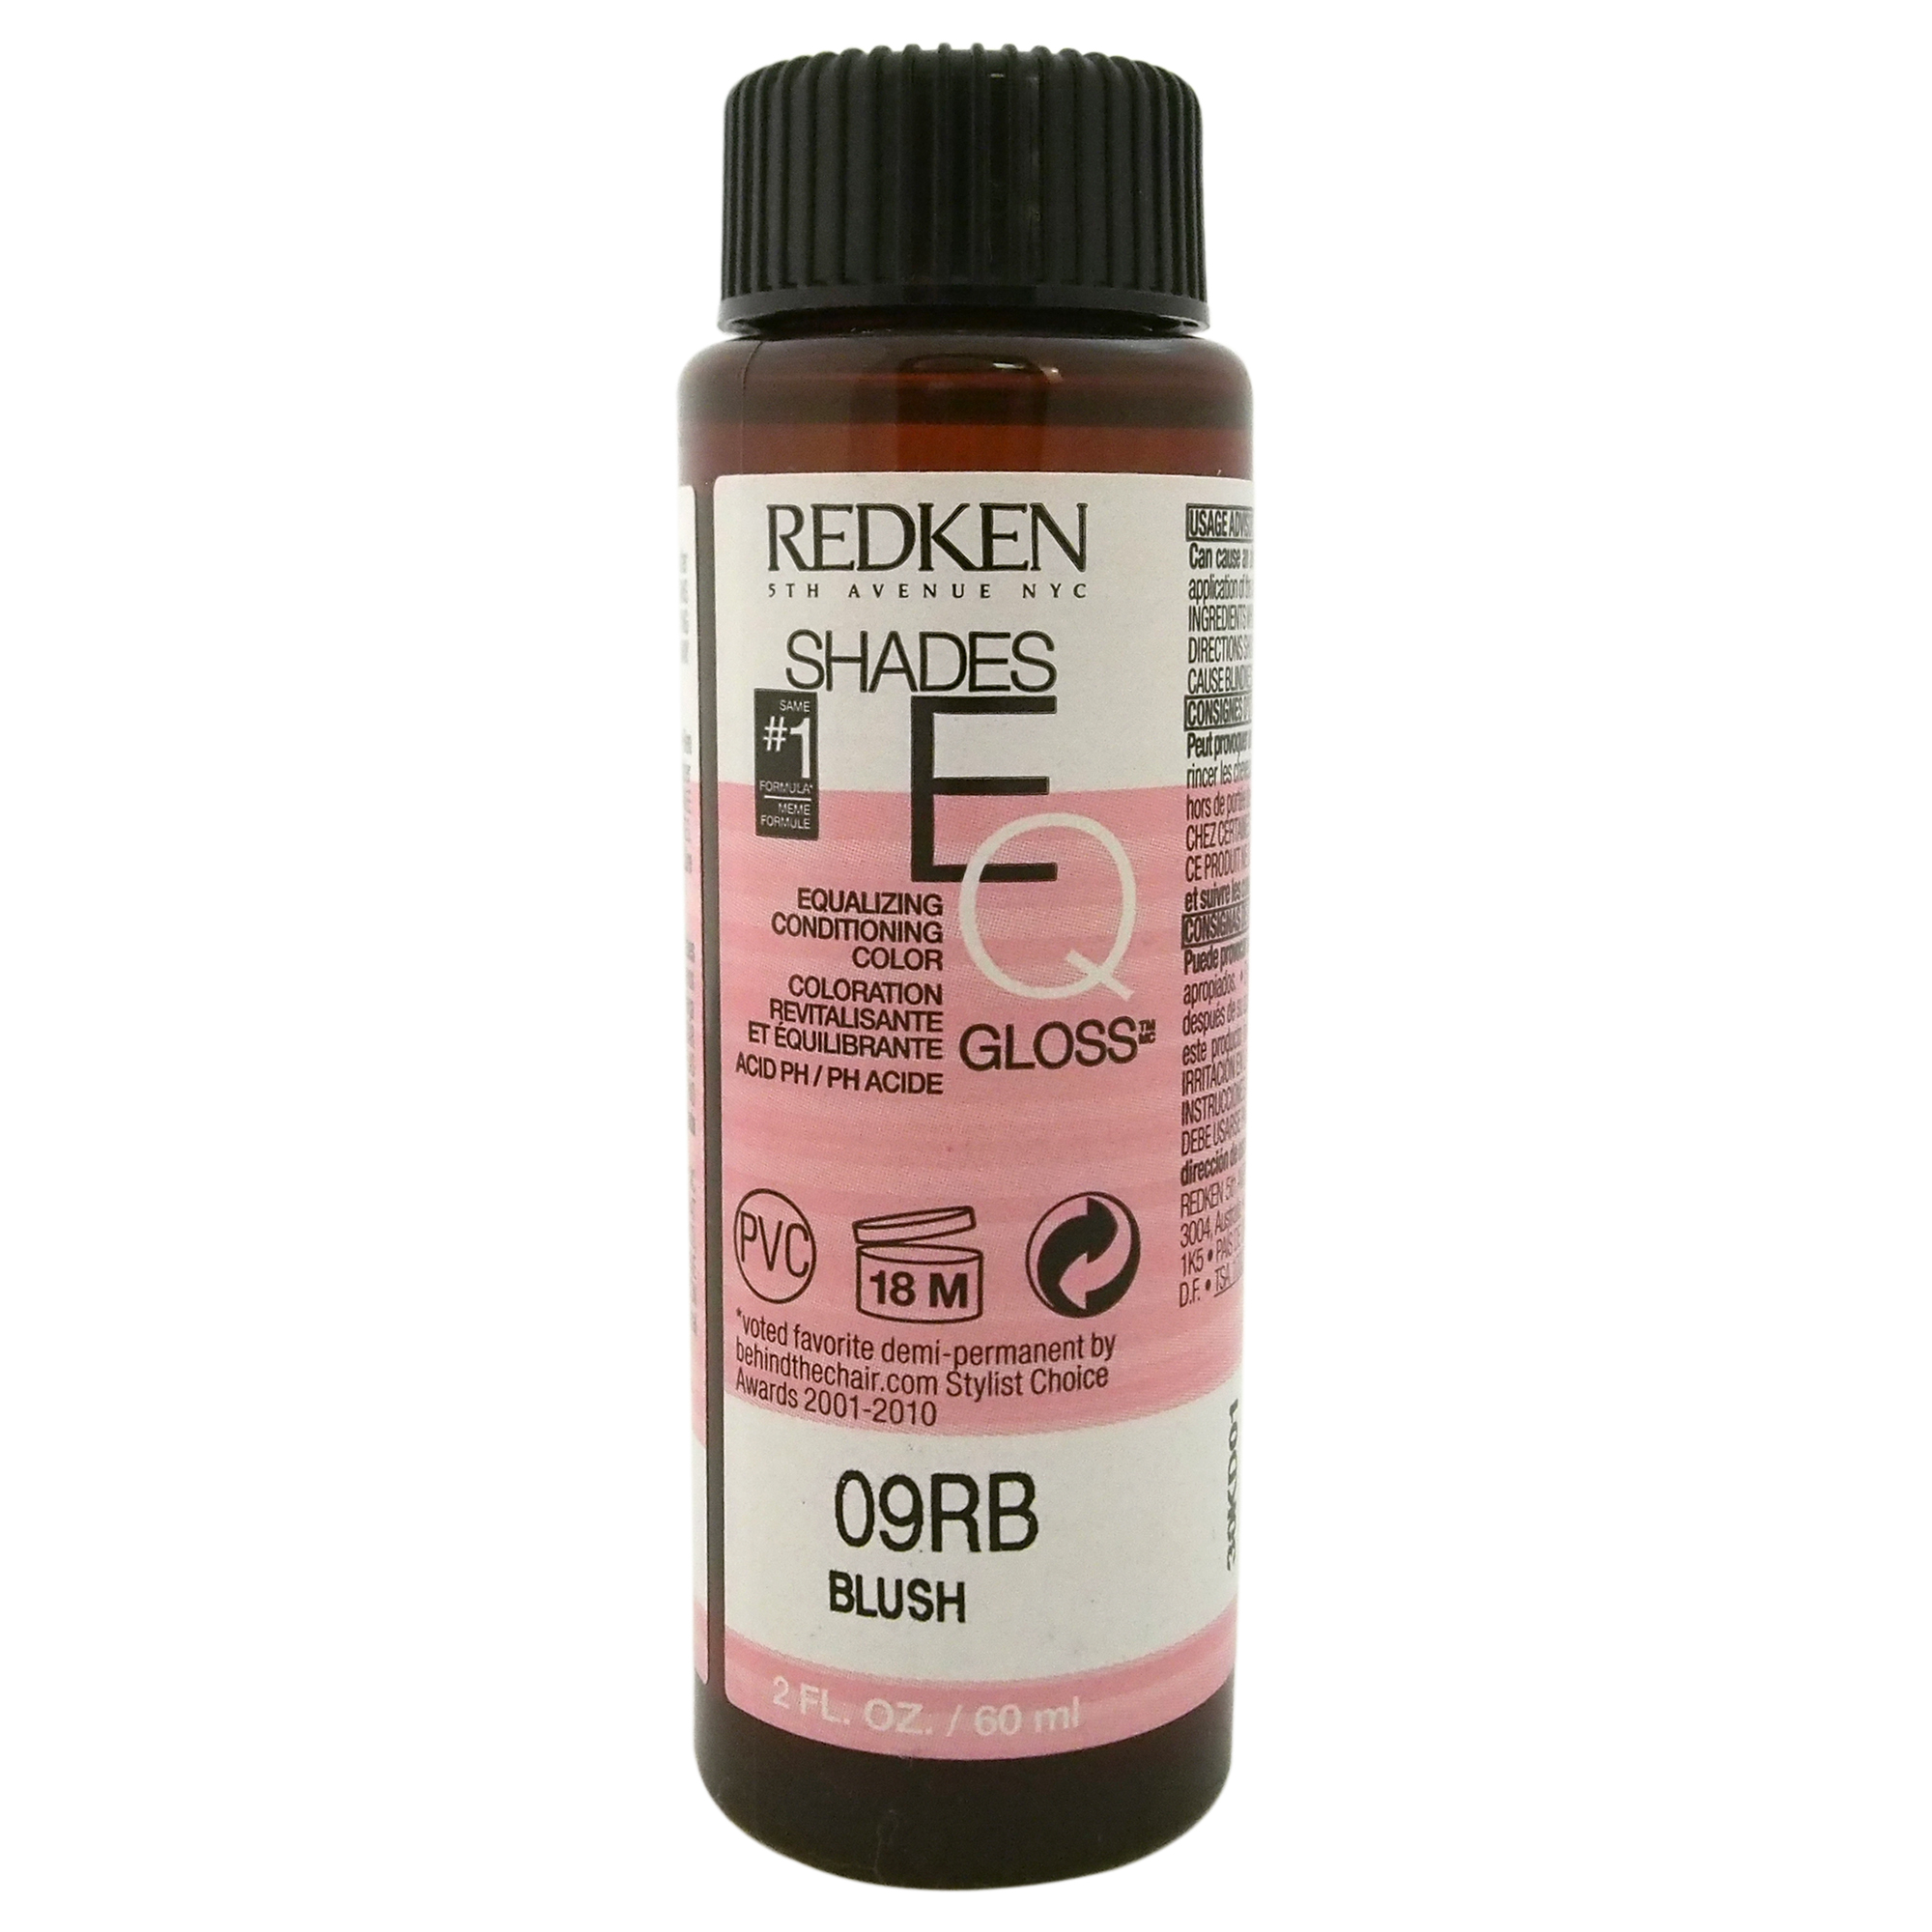 Redken Shades EQ Color Gloss 09RB - Blush by  for Women - 2 oz Hair Color